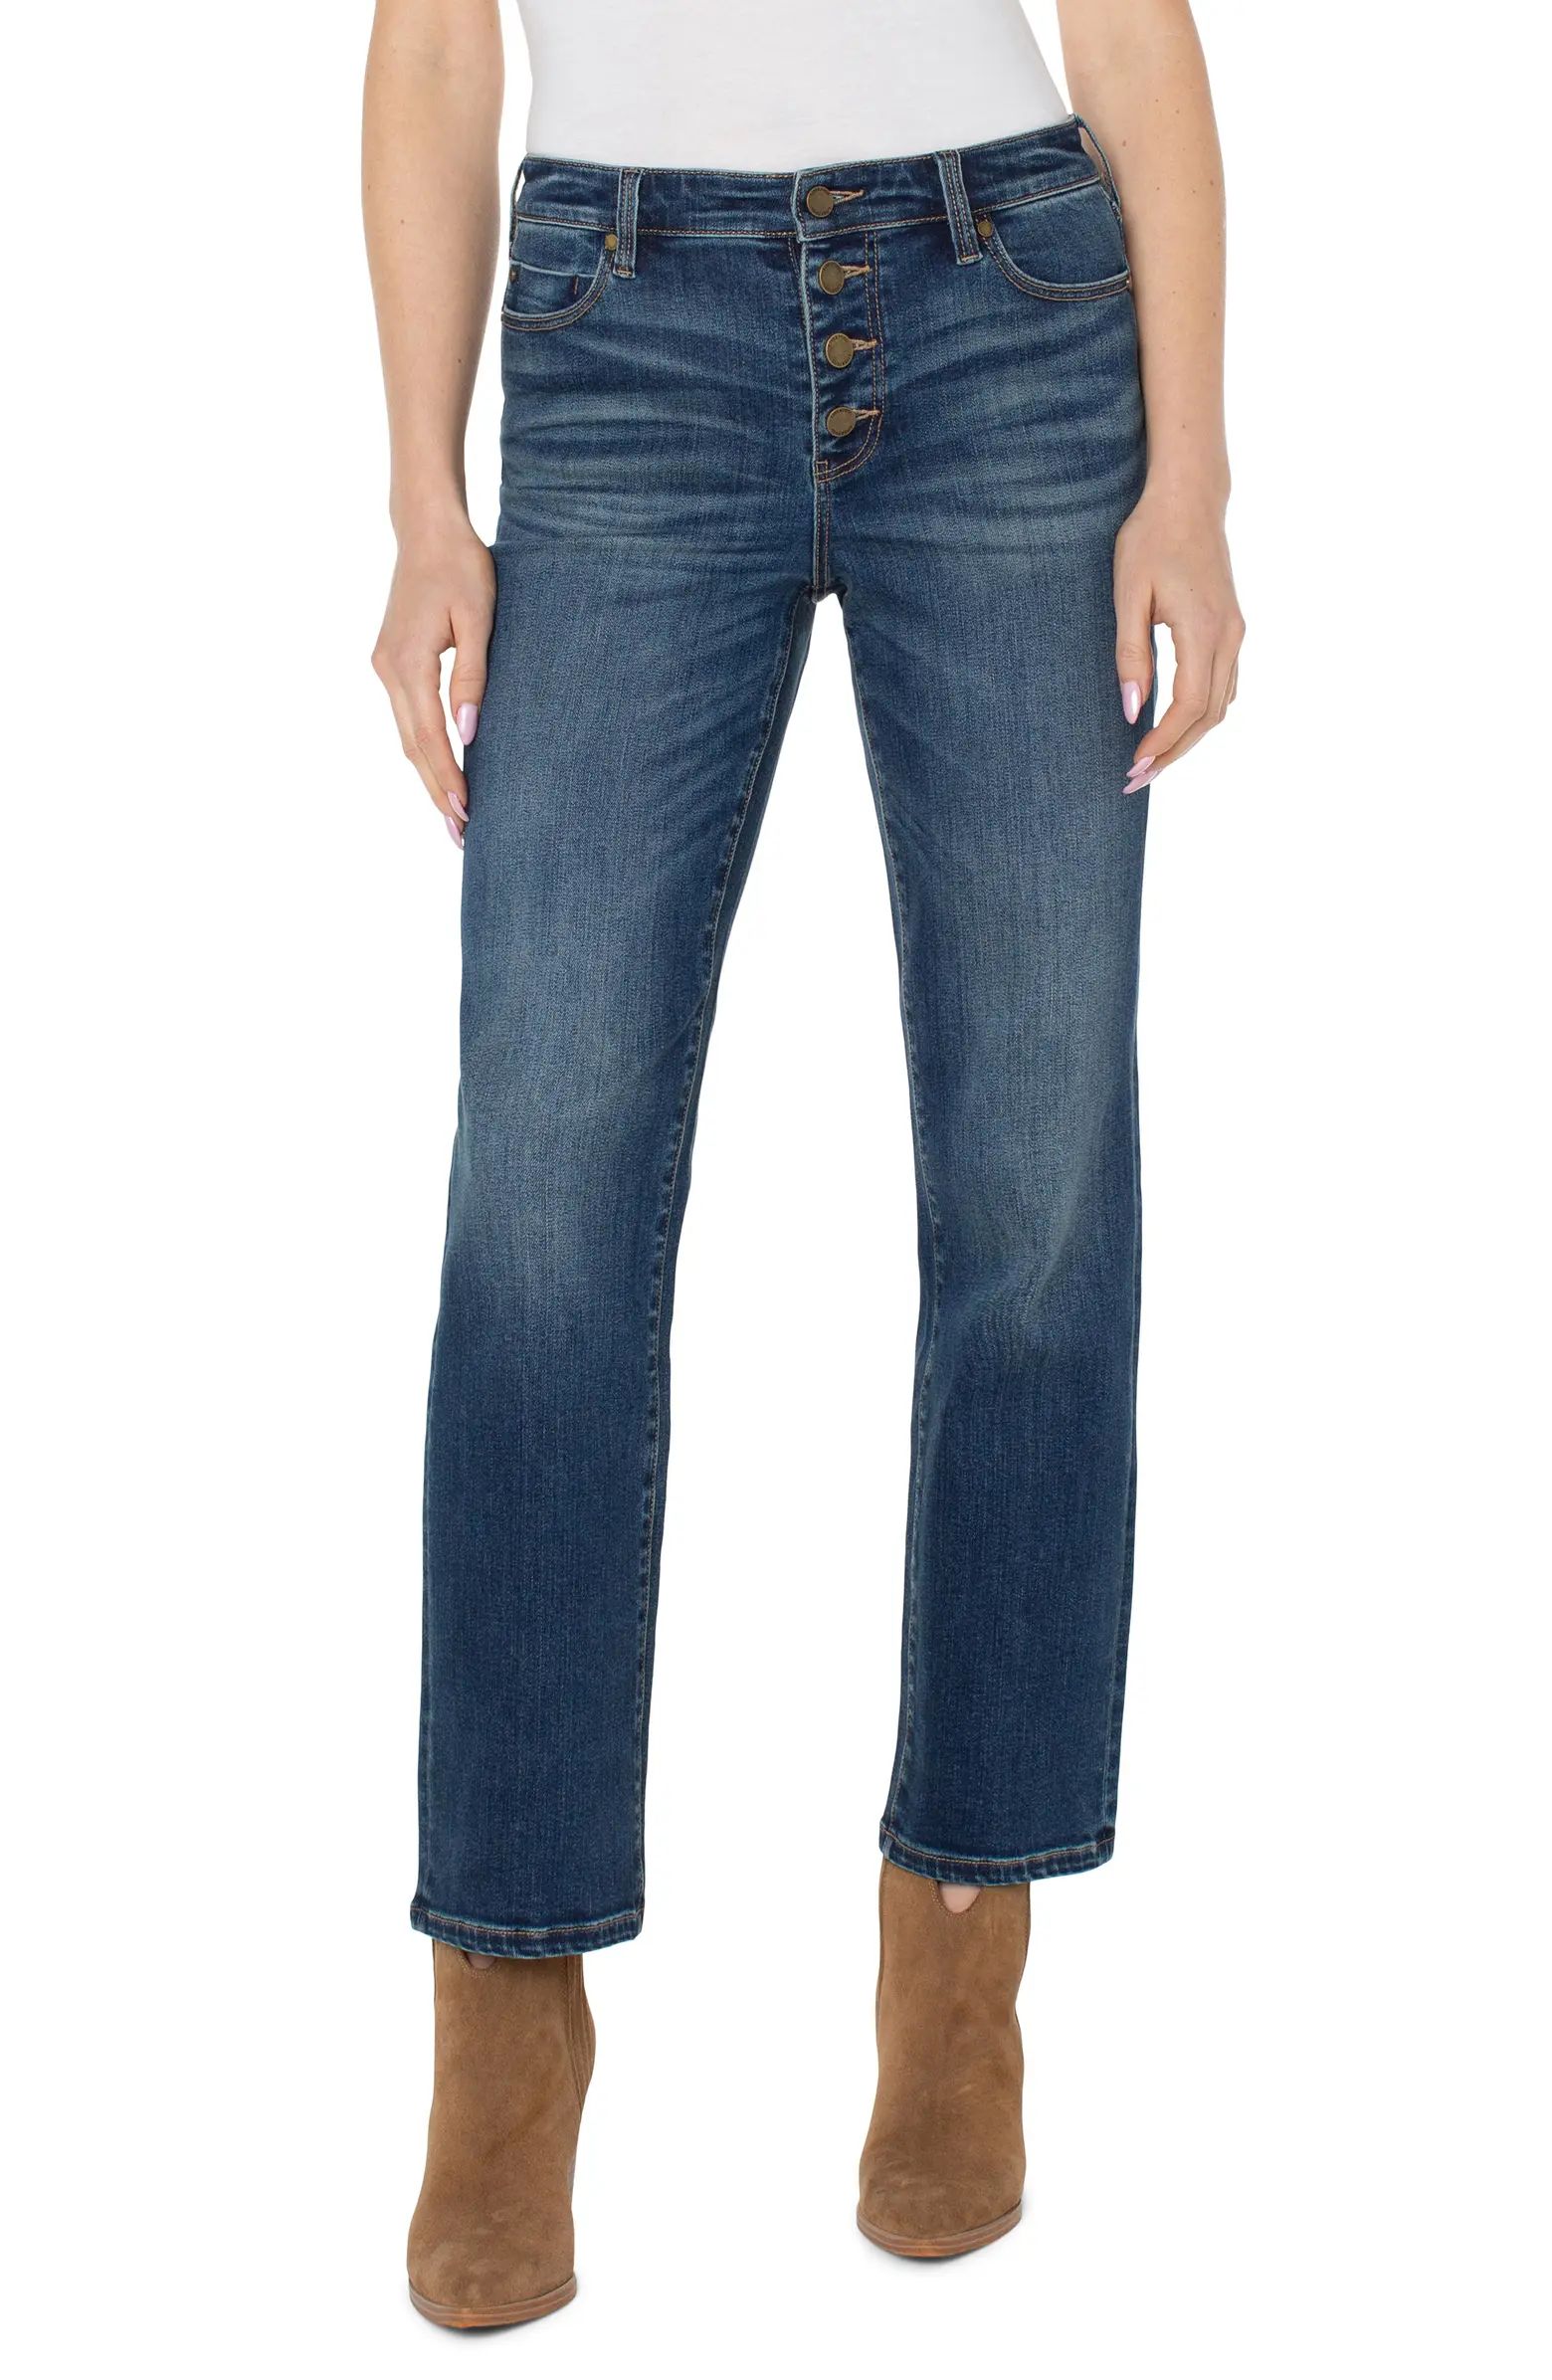 Made with exposed buttons and full-length straight legs, these stretchy, silky-soft jeans are an ... | Nordstrom